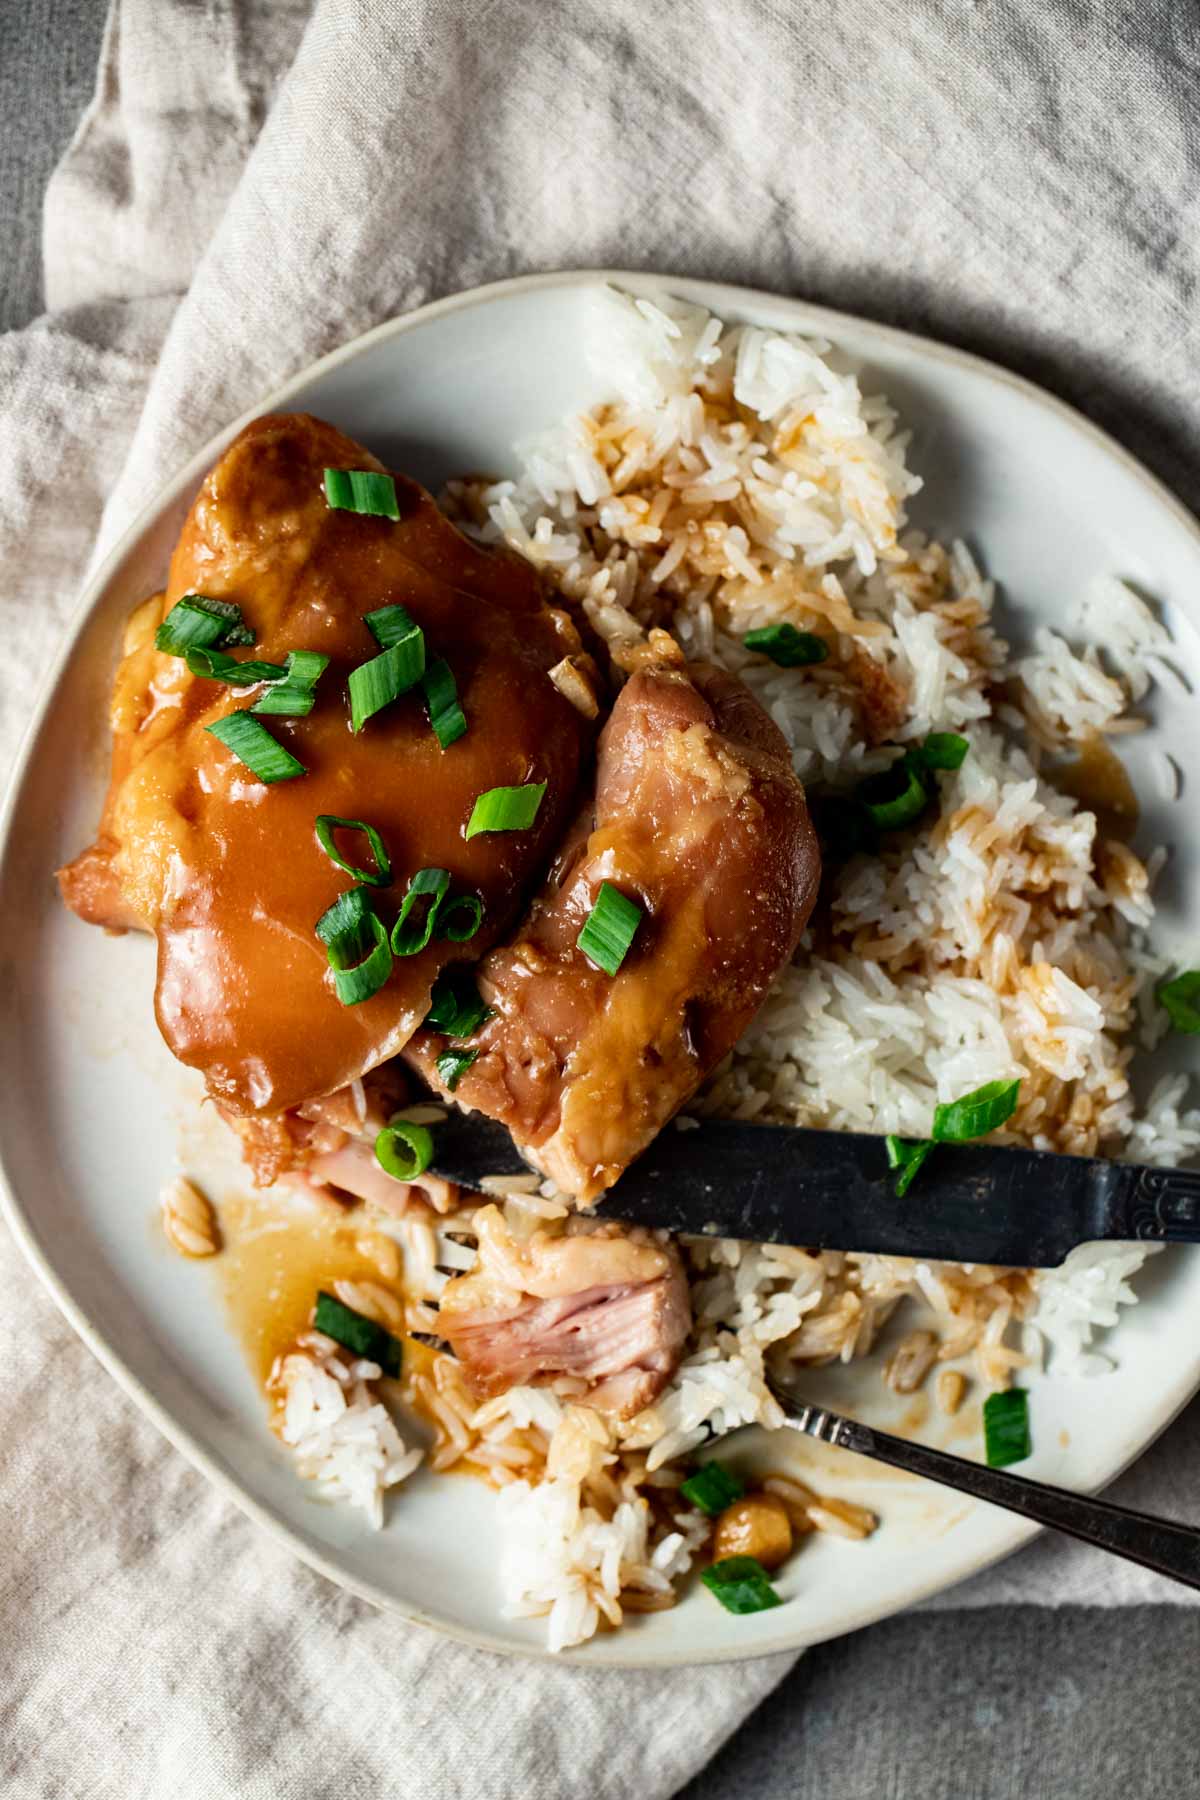 https://www.wenthere8this.com/wp-content/uploads/2022/07/sous-vide-teriyaki-chicken-5.jpg